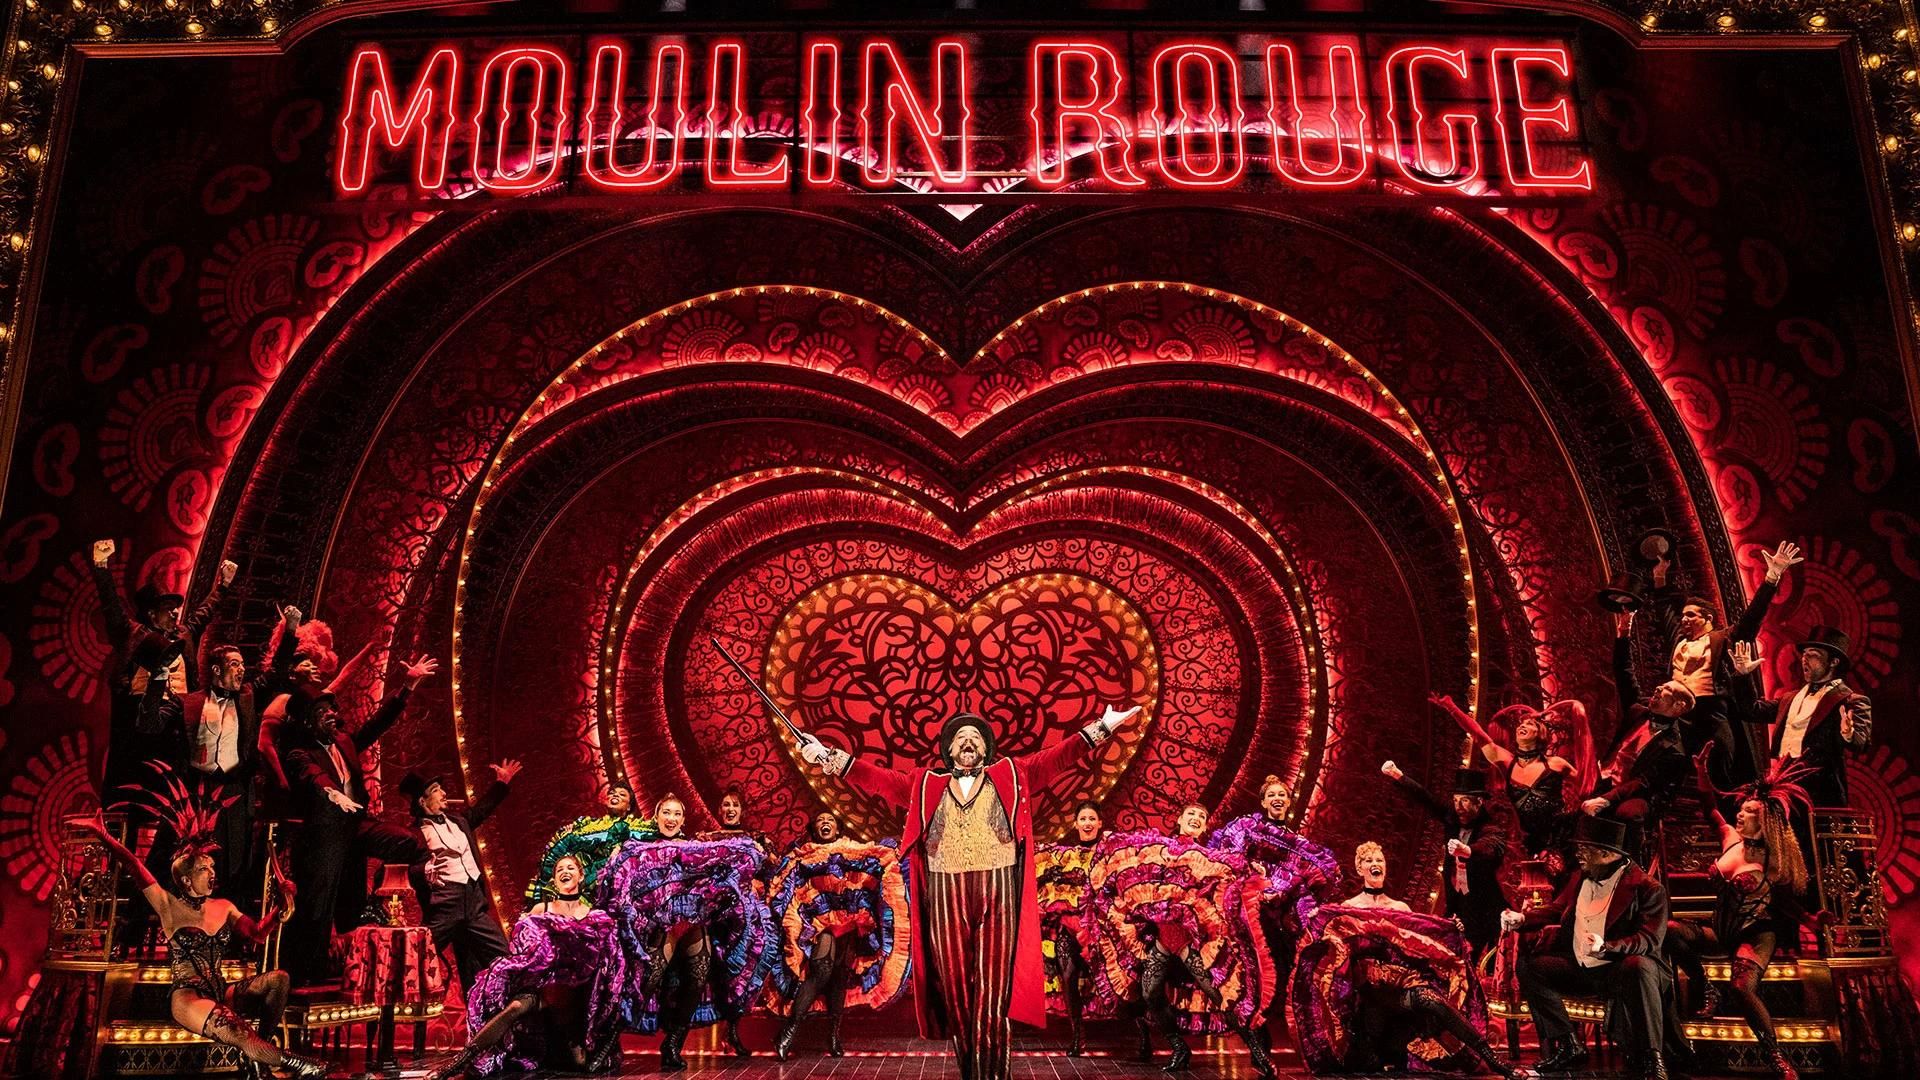 Moulin Rouge shows at The Fabulous Fox as part of 5 things to do in St. Louis this weekend.